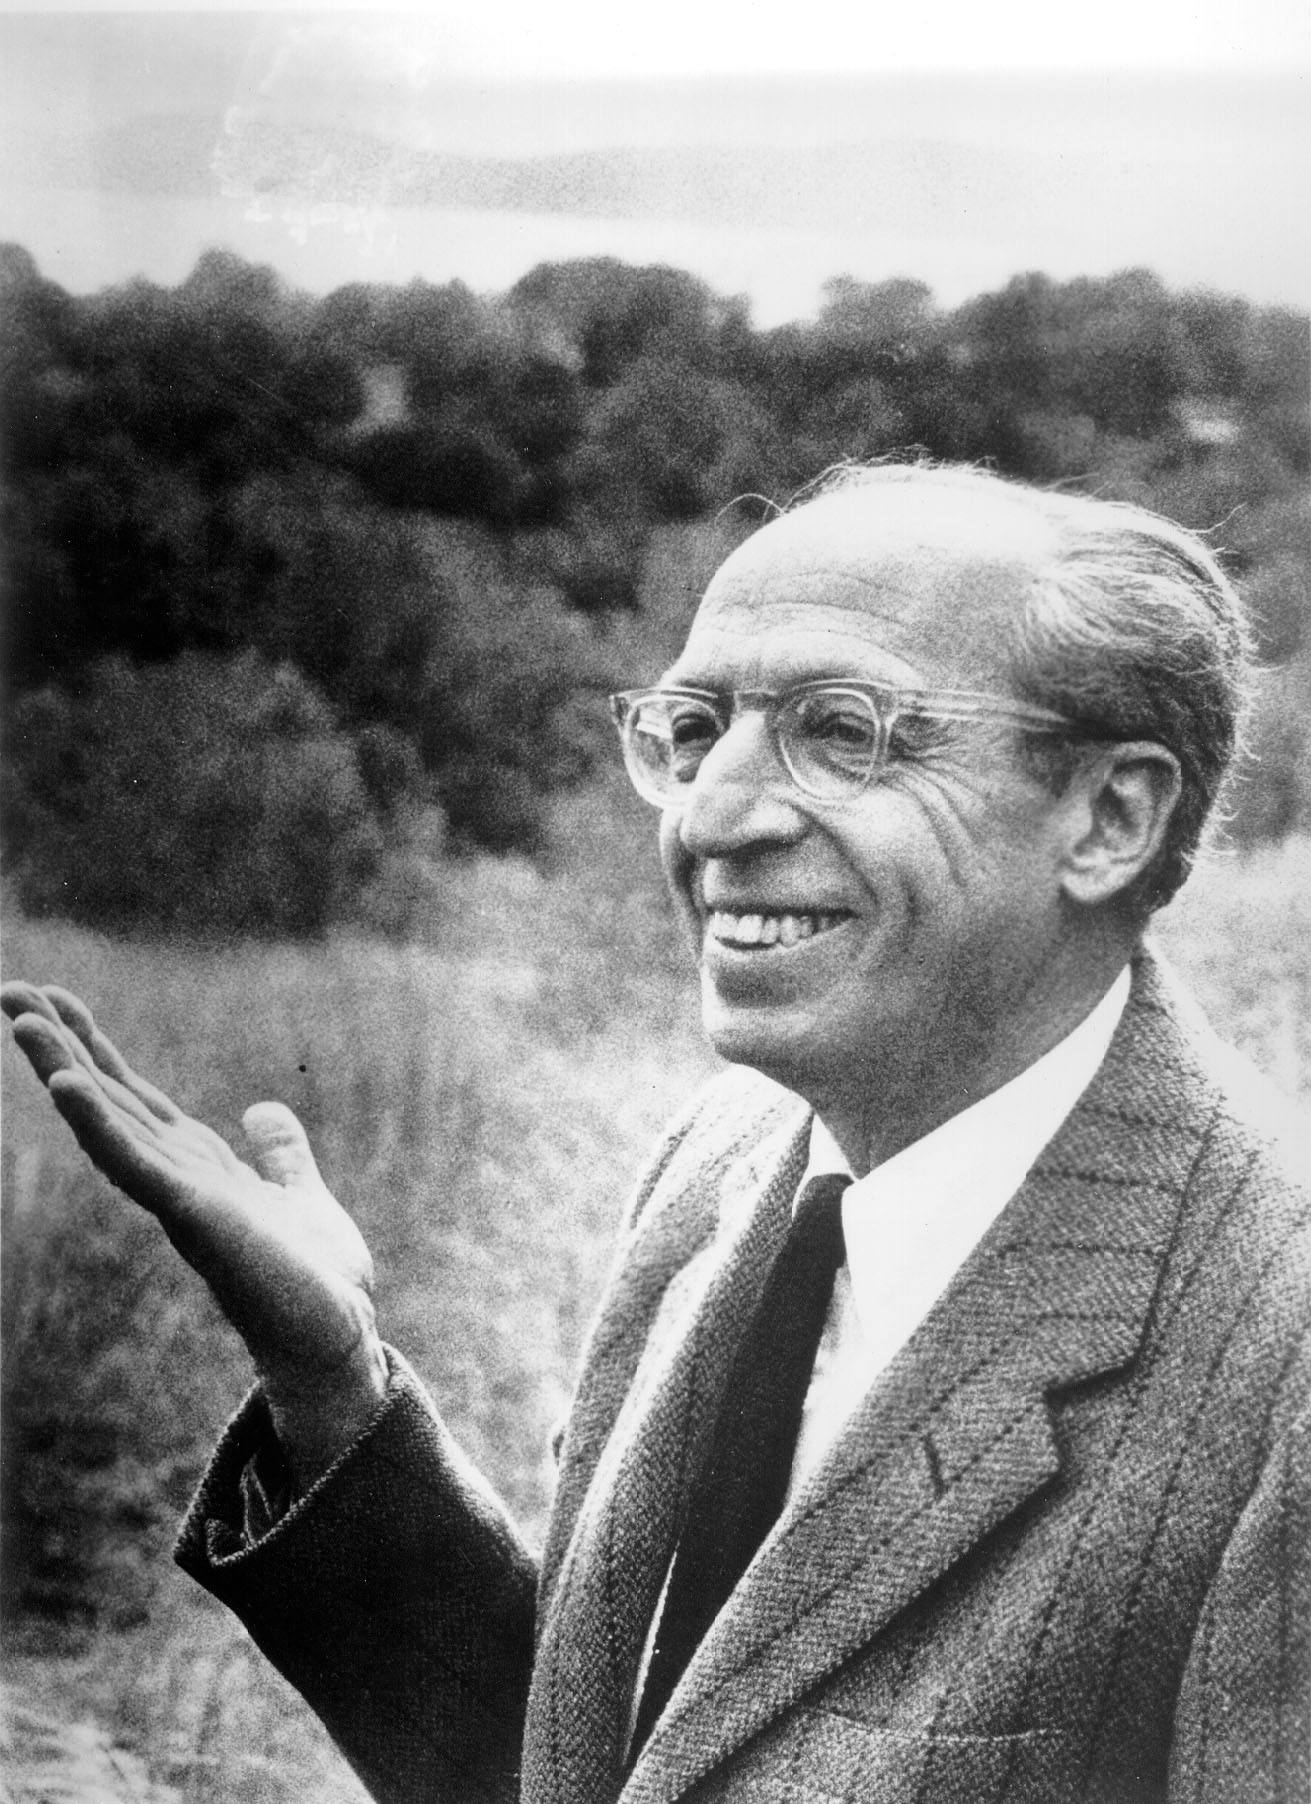 Aaron Copland black and white image with his hand out